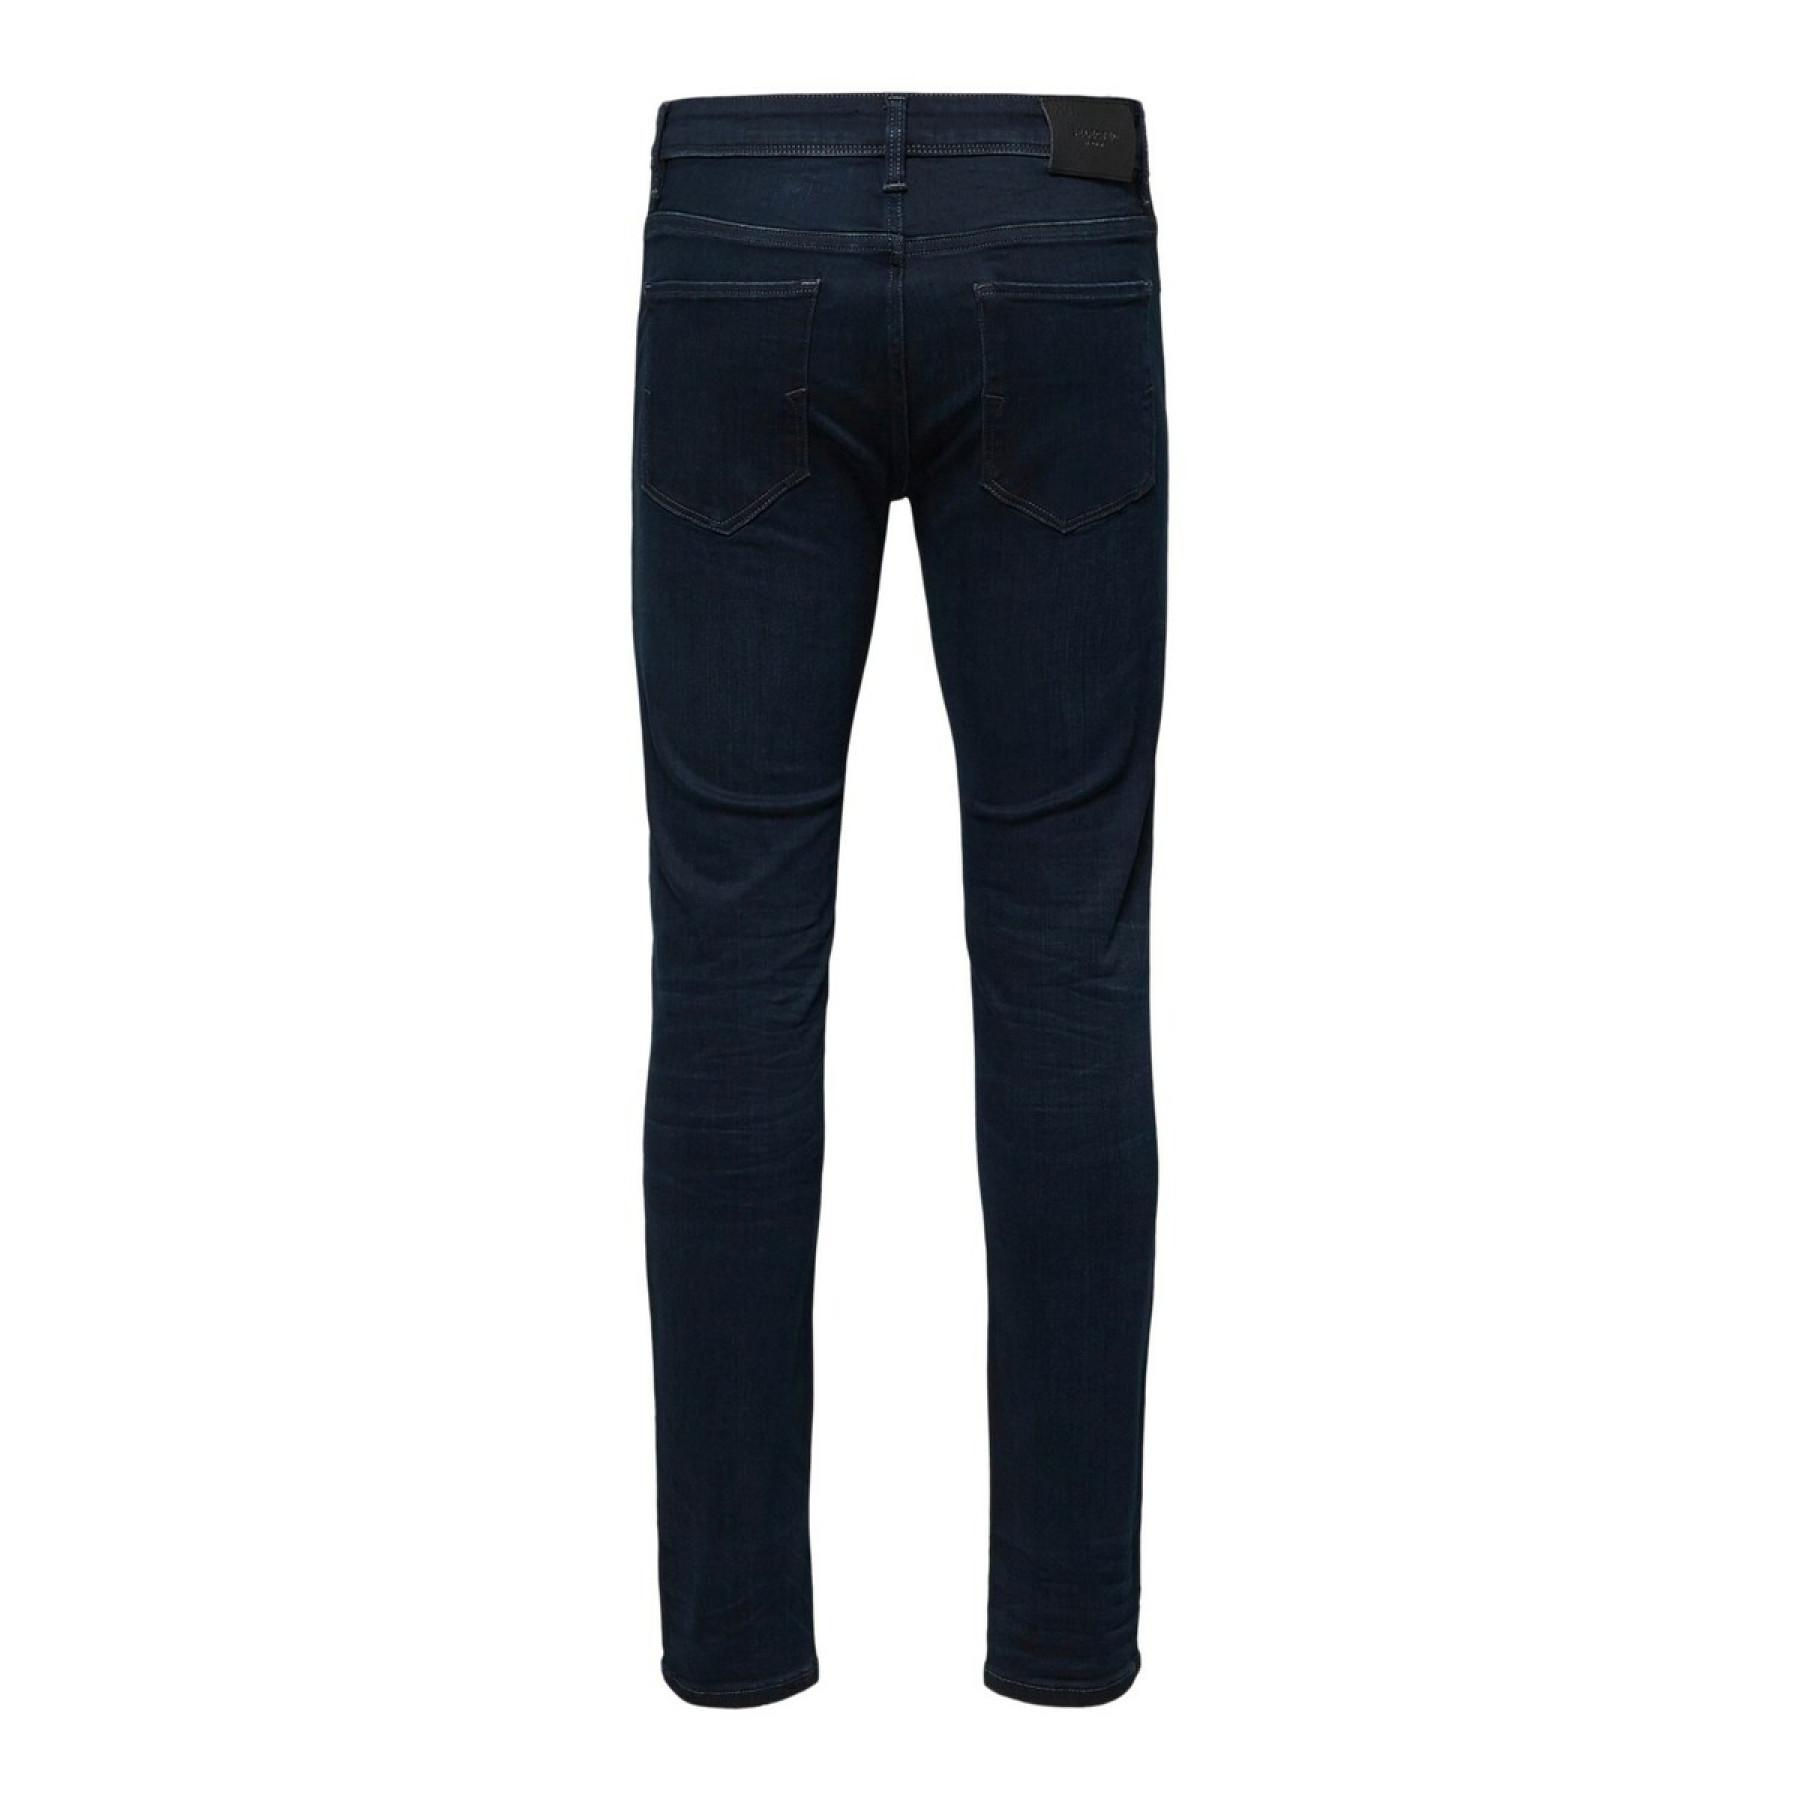 Jeansy Selected Leon 6155 slim